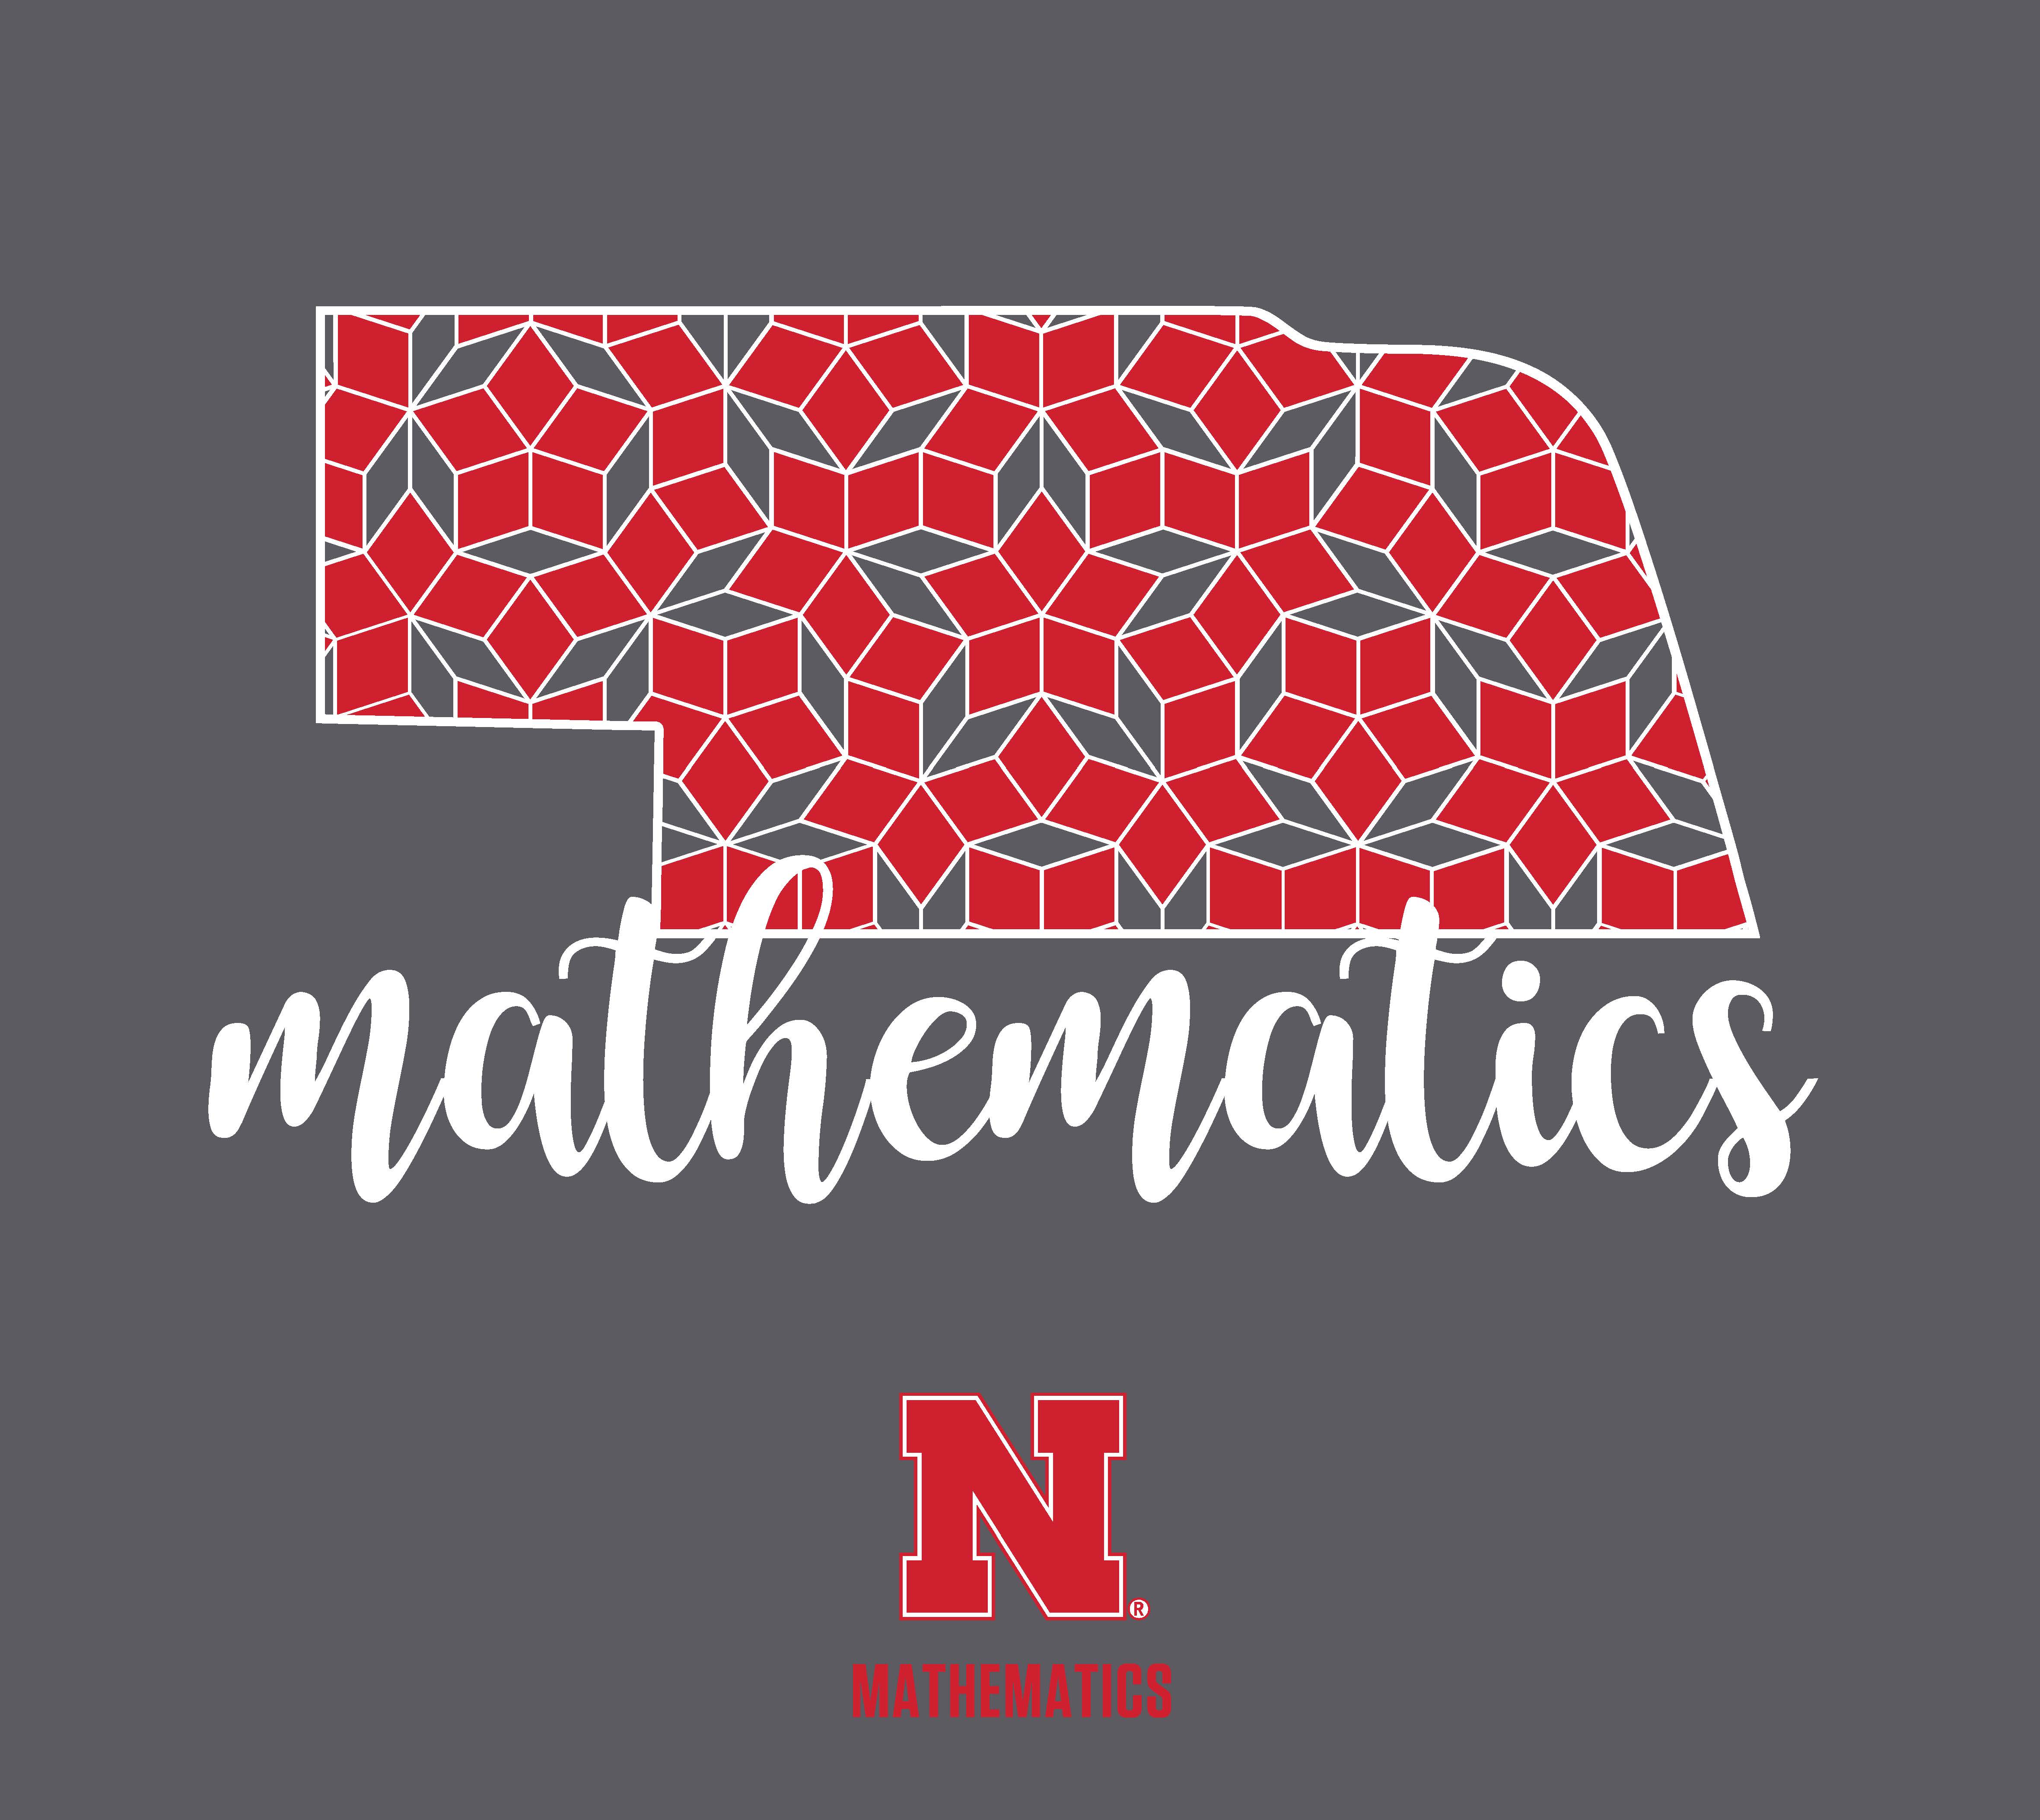 Design for front of math shirts